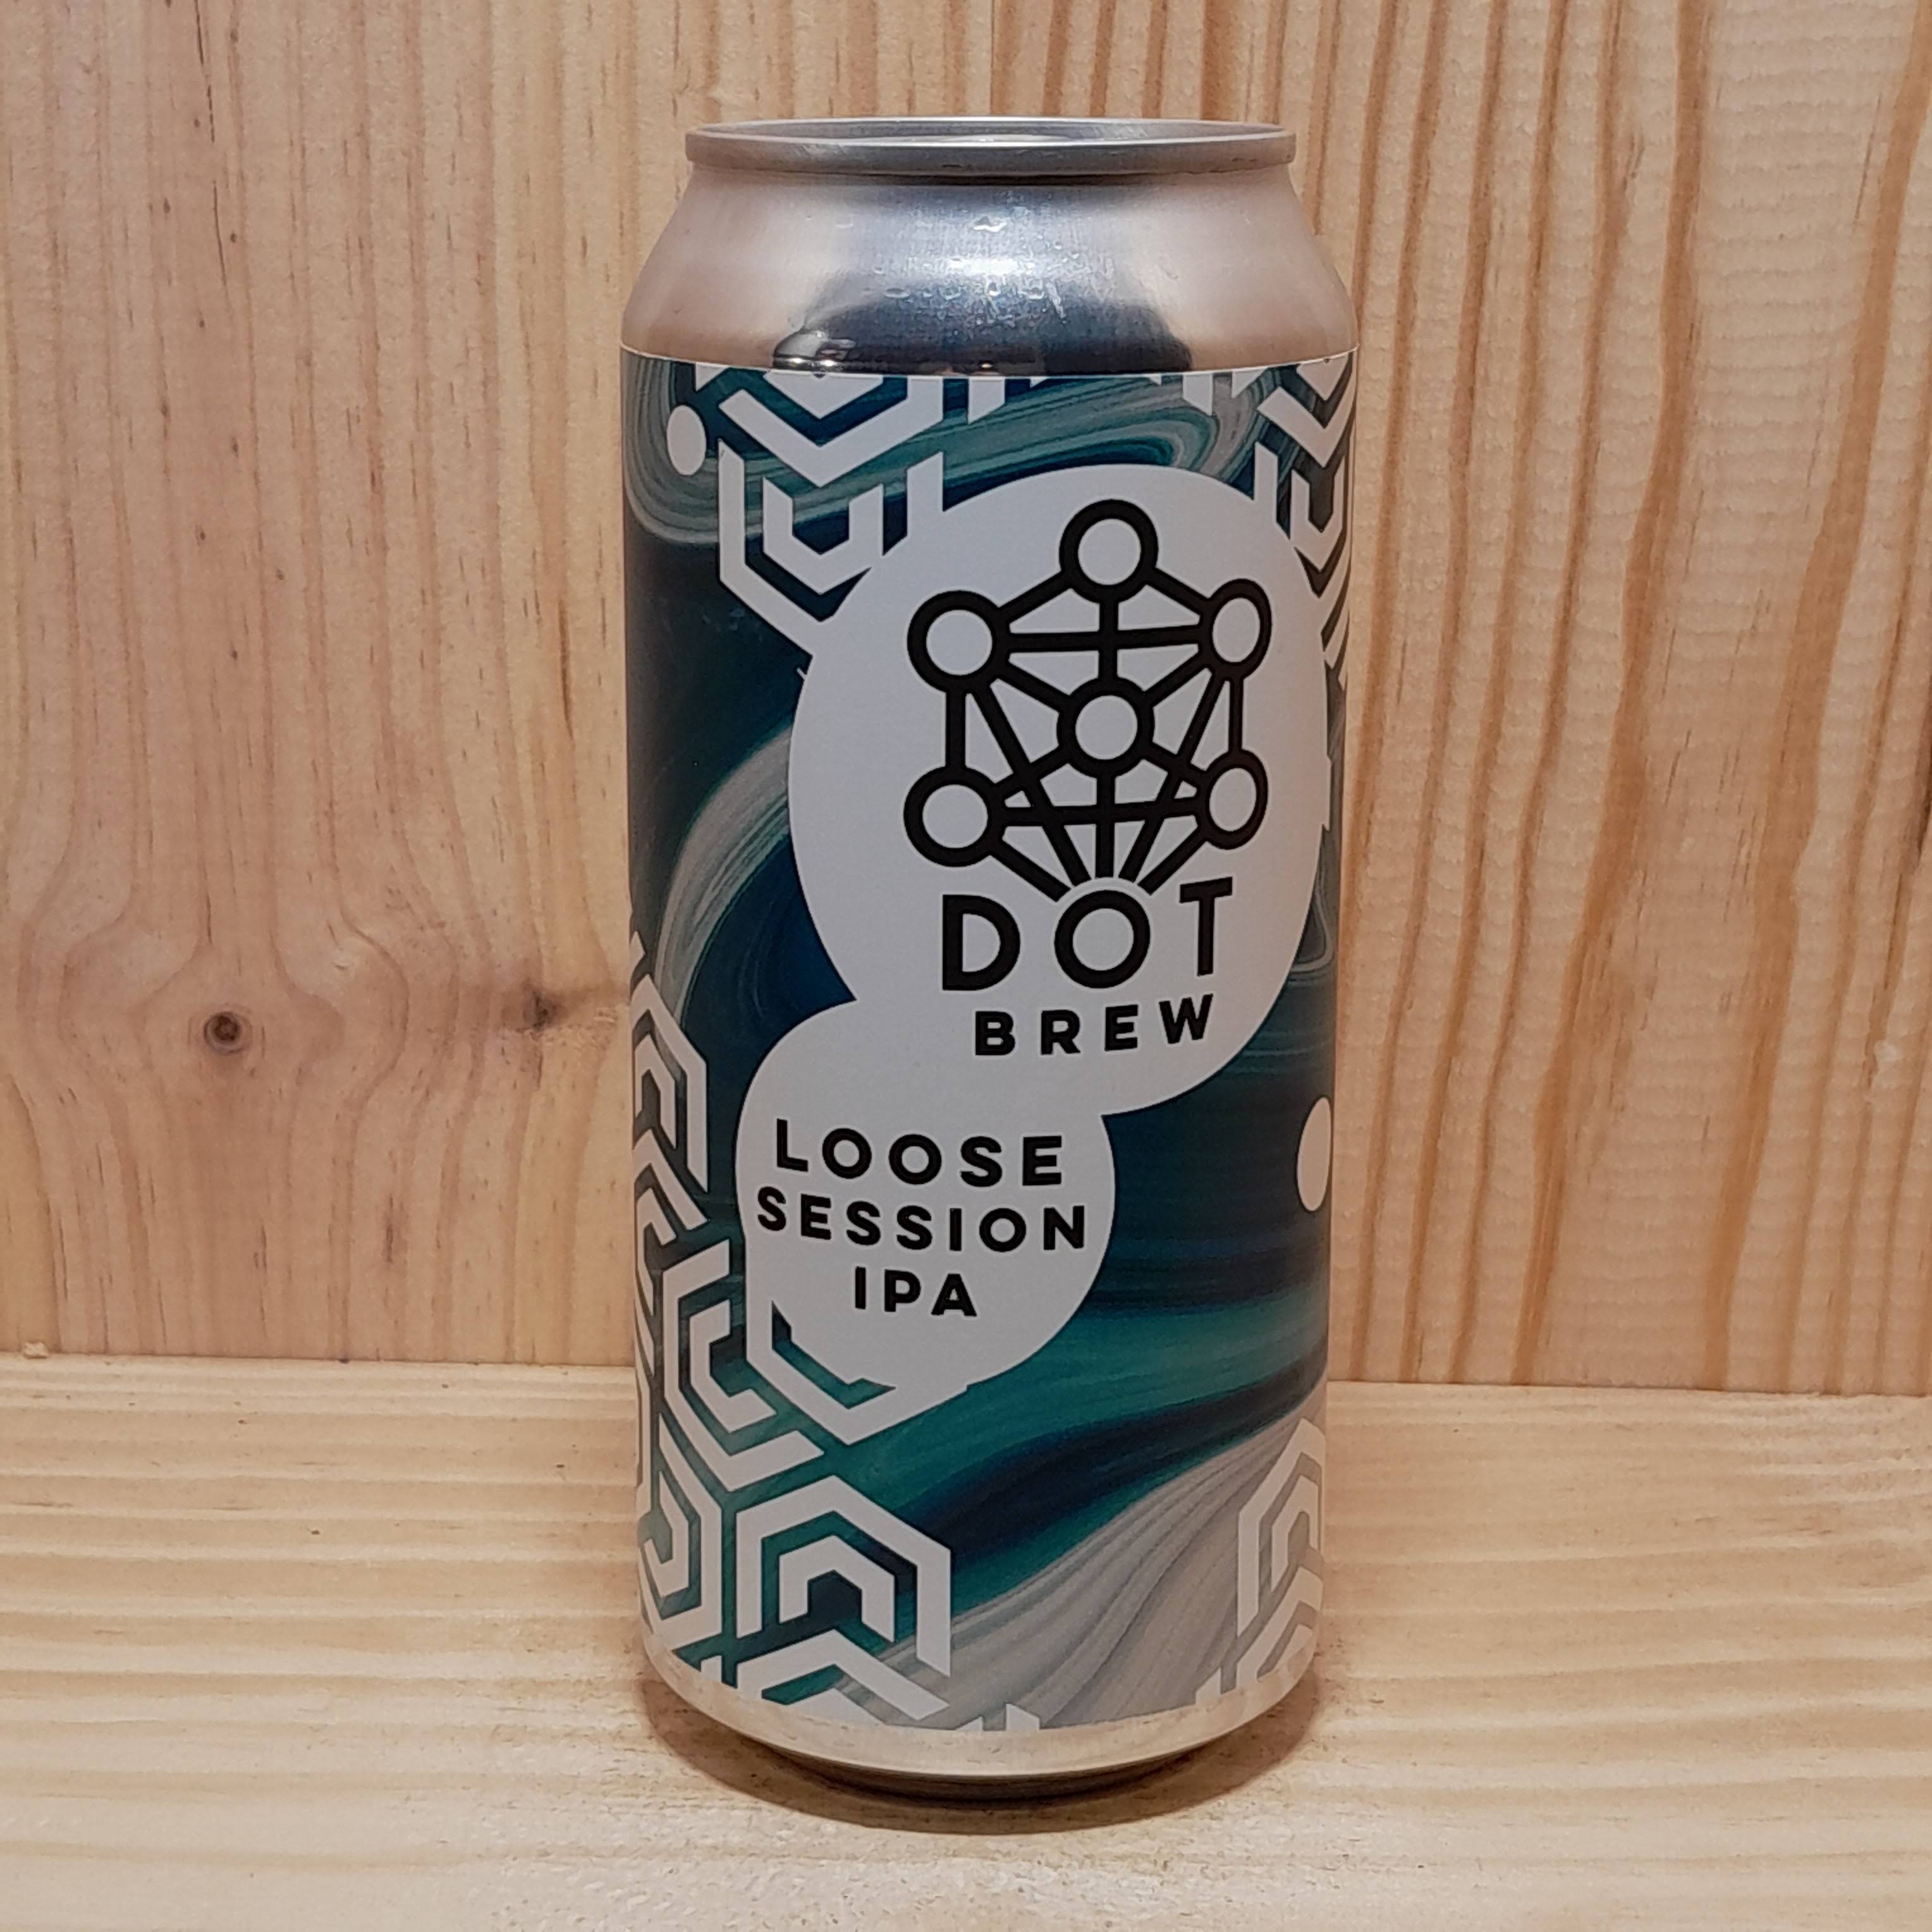 Dot Brew - Loose Session IPA 3.5% ABV 440ml Can